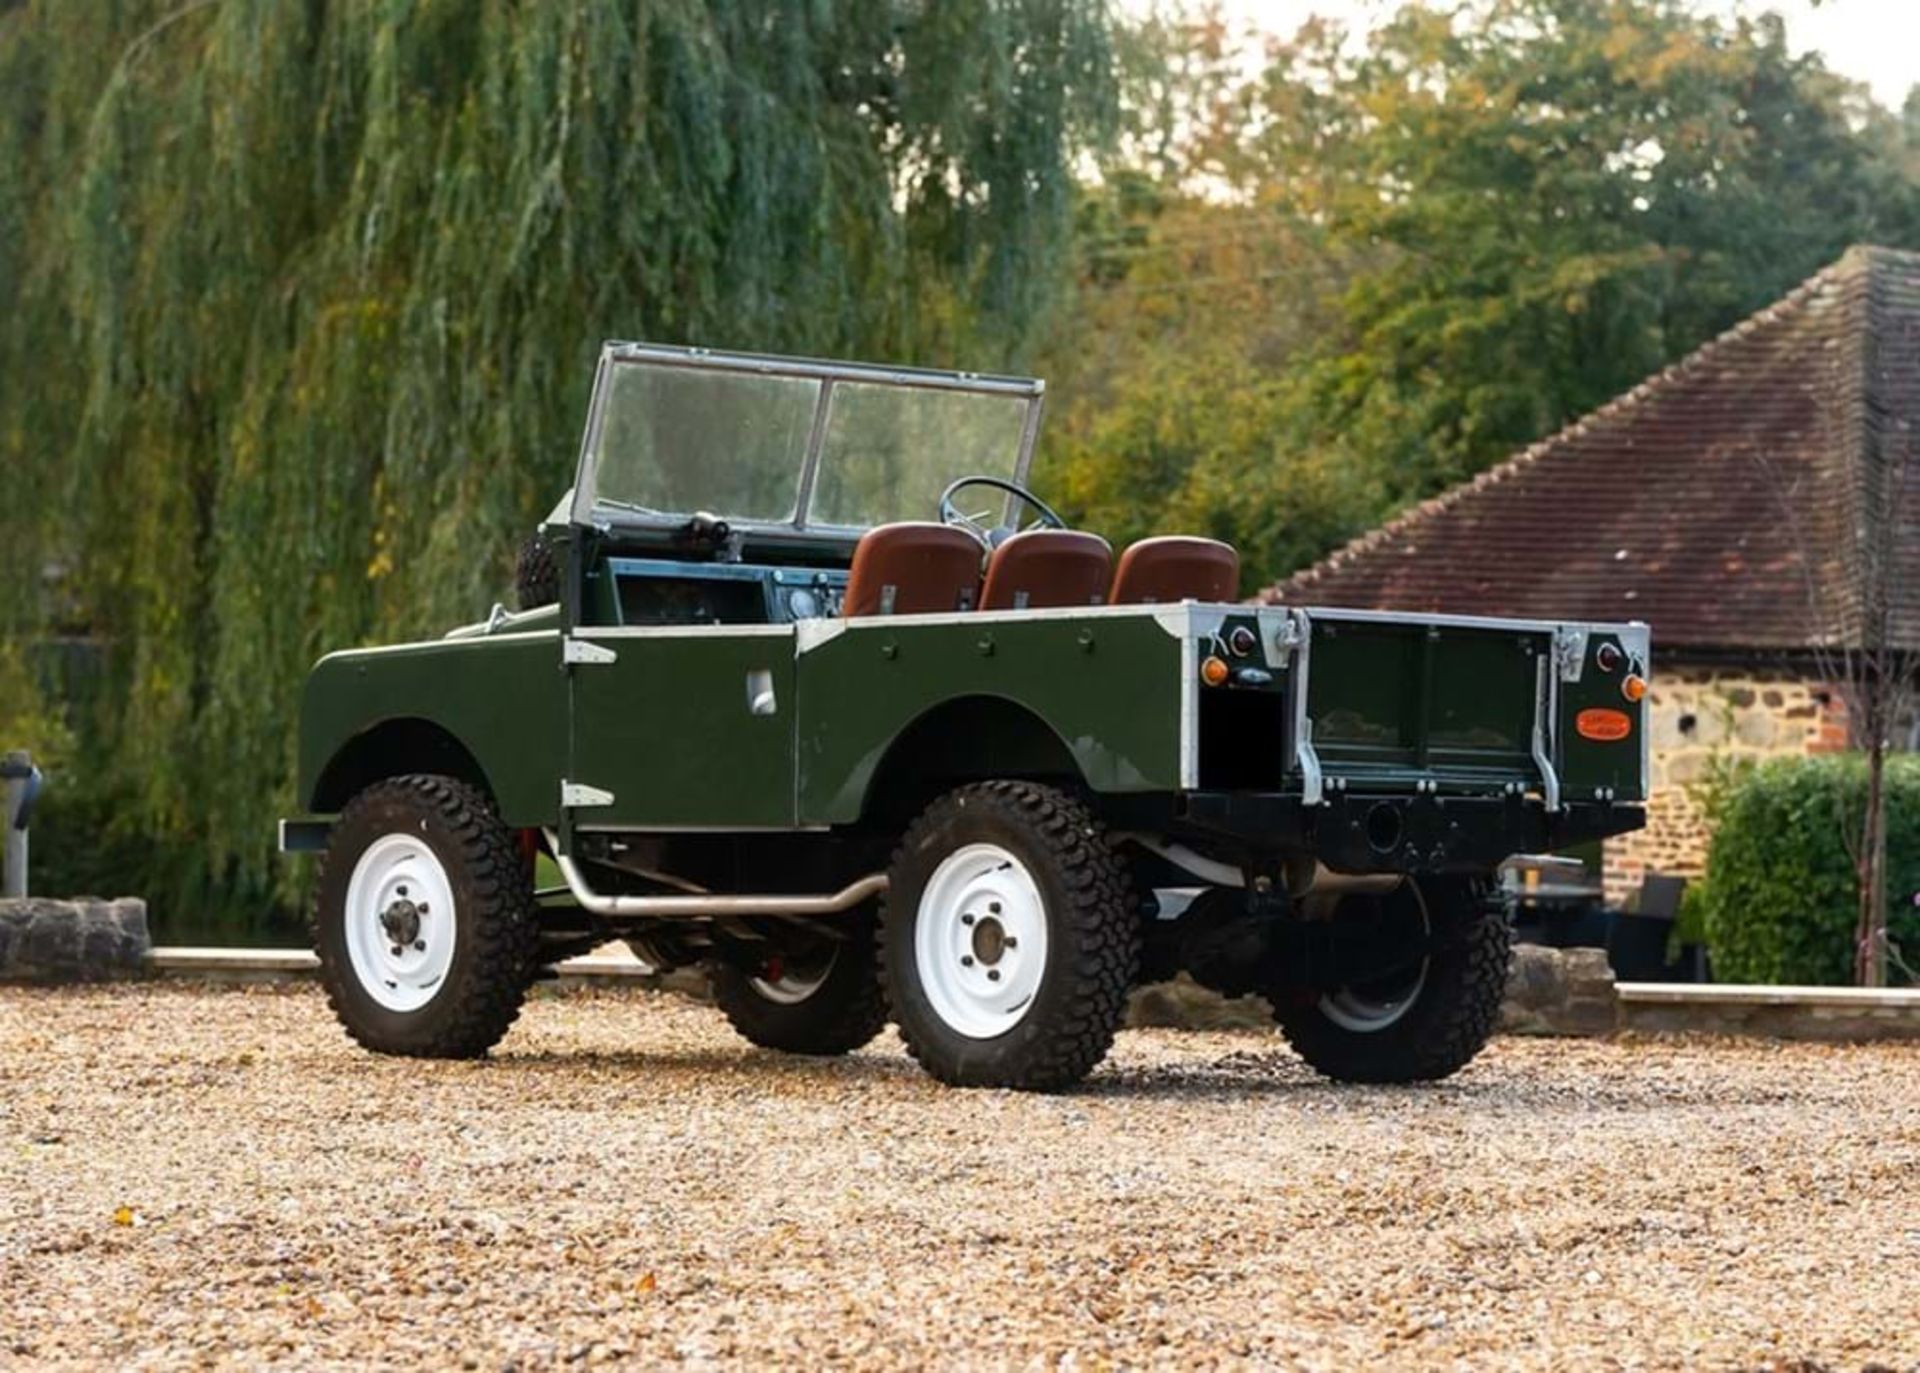 1955 Land Rover Series I (86") - Image 7 of 10